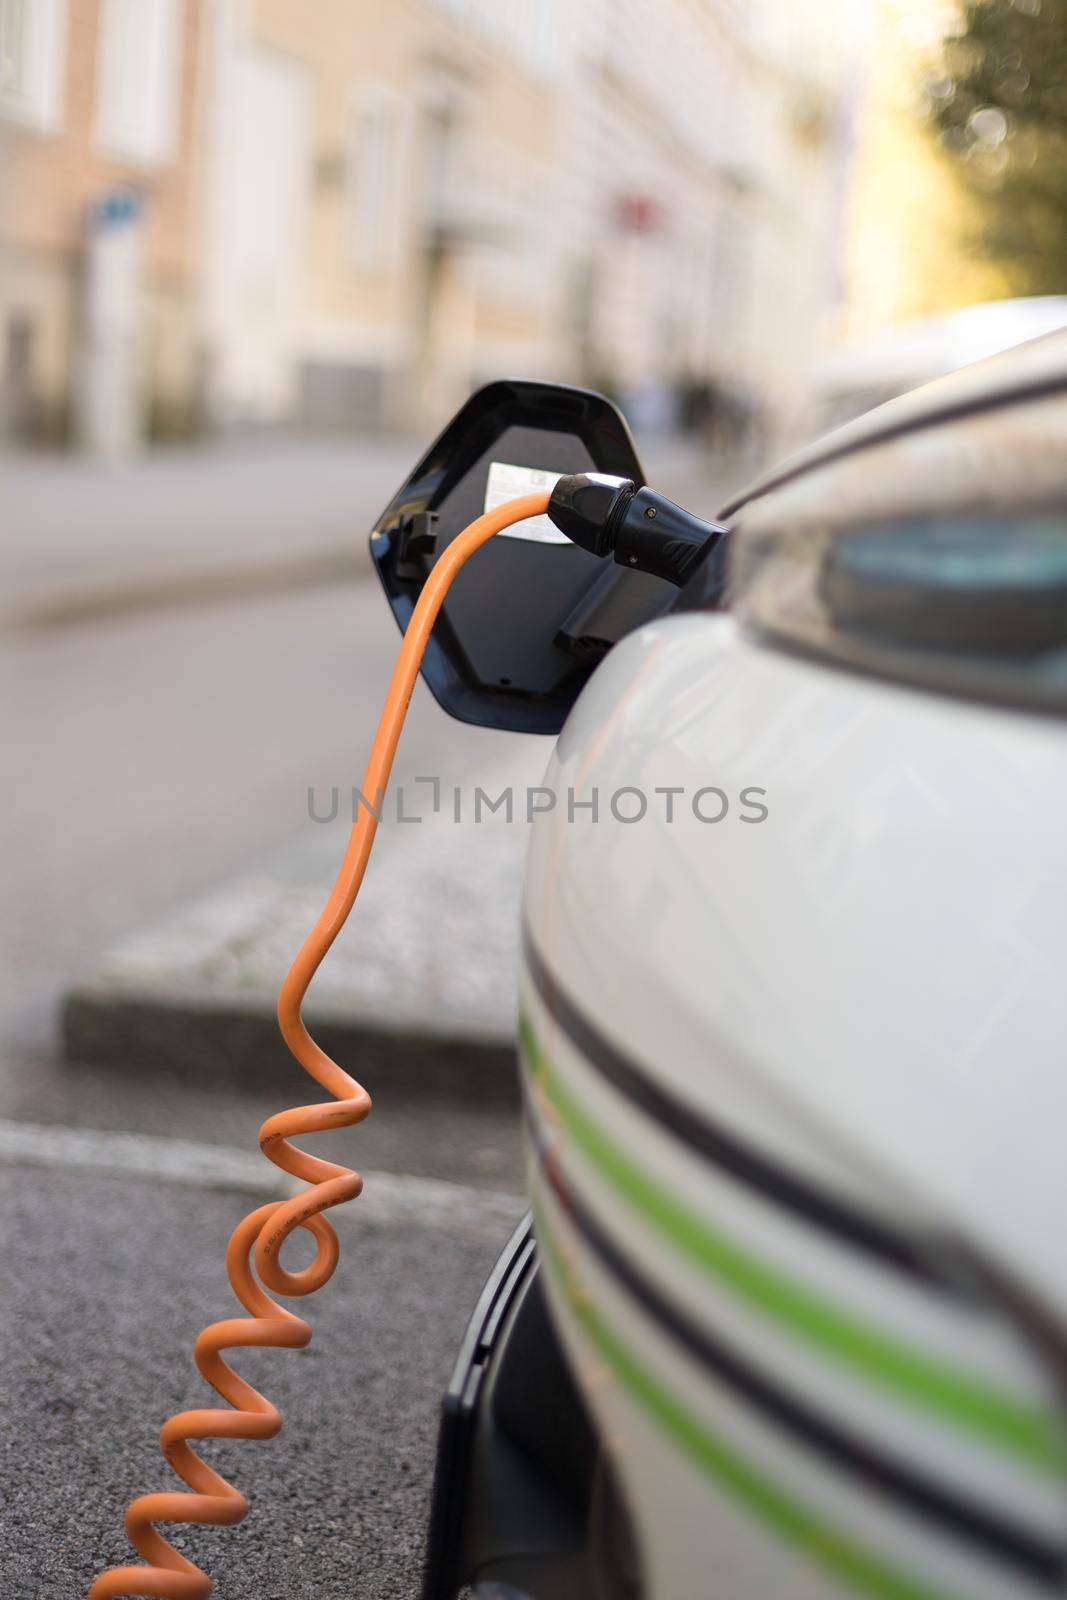 Charching an electric car with power cable supply, plugged in by Daxenbichler